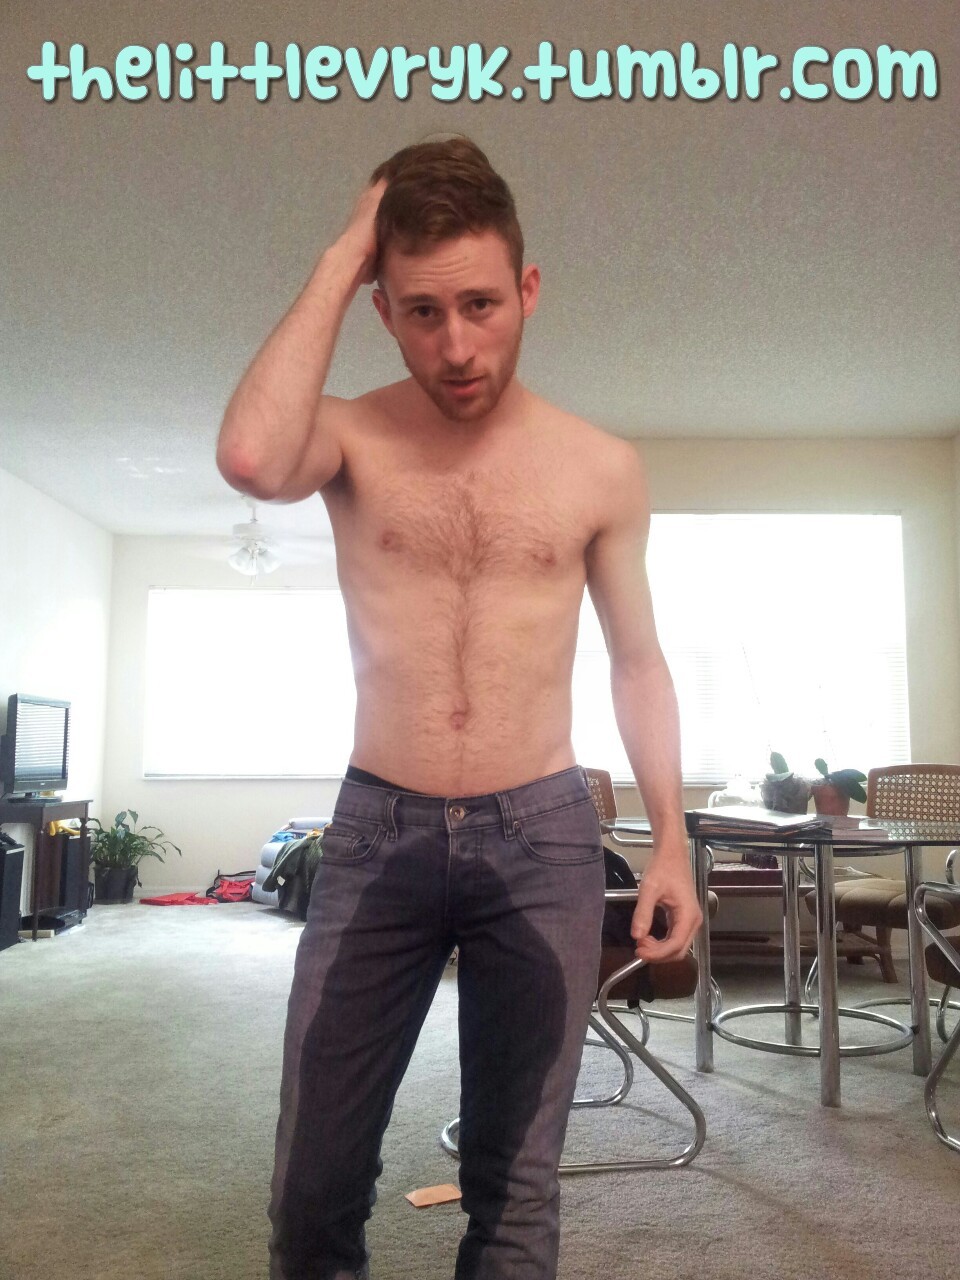 thelittlevryk:  I had a little bit of fun not wearing diapers for a little while